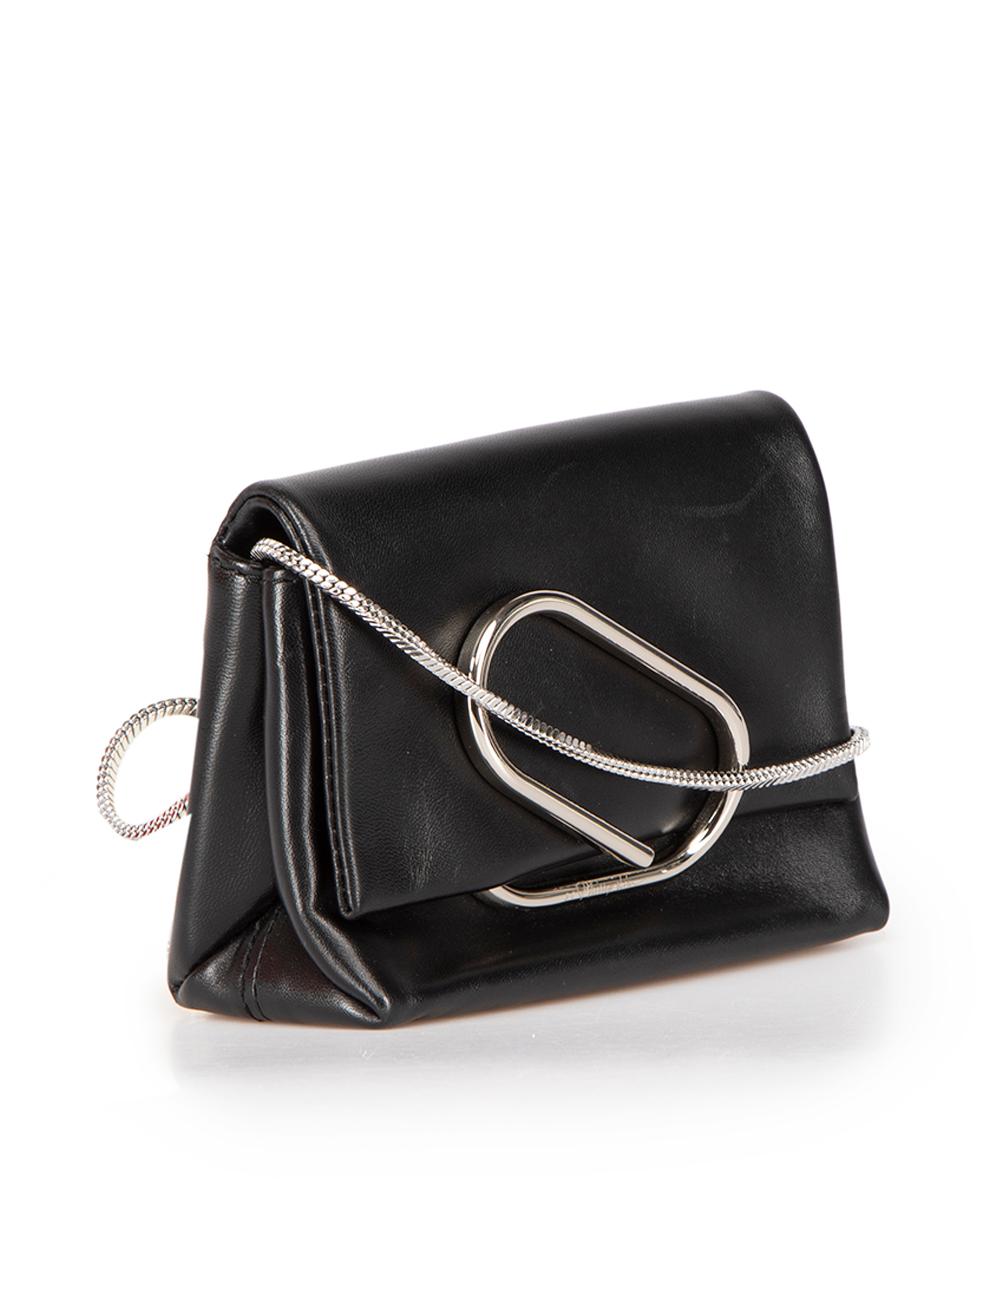 CONDITION is Very good. Minimal wear to bag is evident. Minimal scratches to front flap, bottom and interior of bag on this used 3.1 Phillip Lim designer resale item.
 
Details
Alix Mirco
Black
Leather
Mini crossbody bag
Flap with paperclip slip